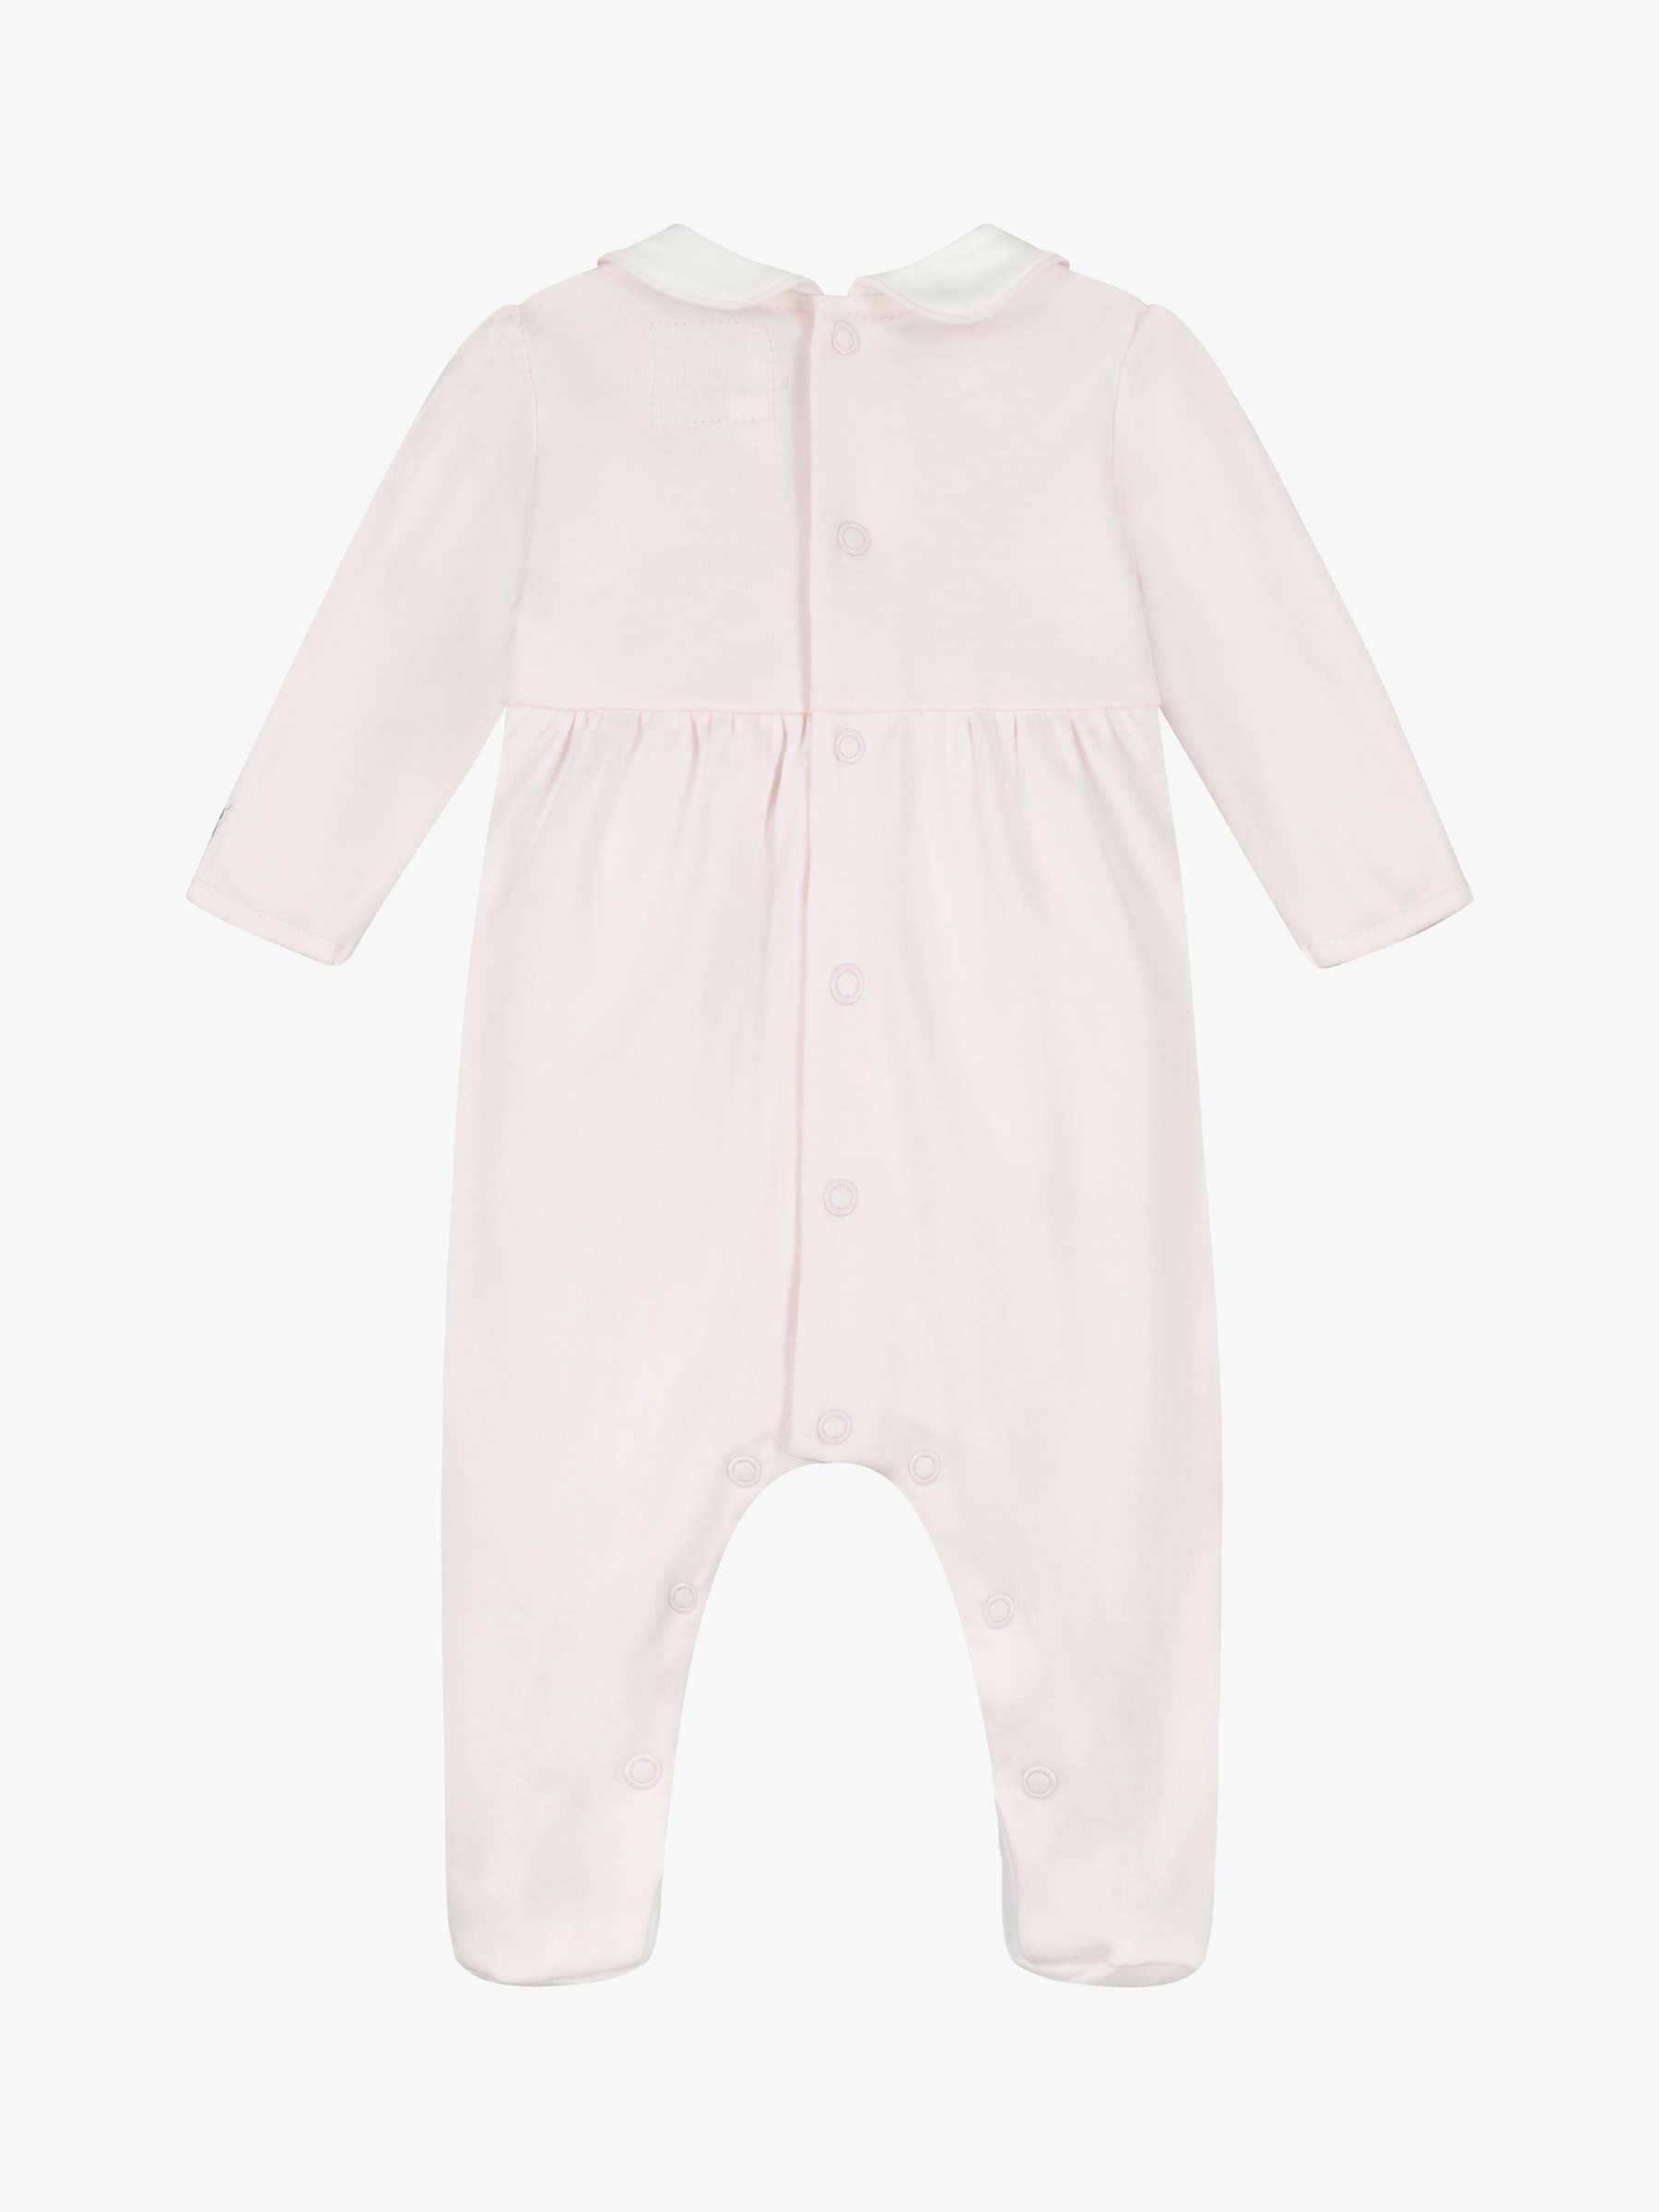 Buy Emile et Rose Baby Dusty Embroidered Yolk All-in-One, Light Pink Online at johnlewis.com